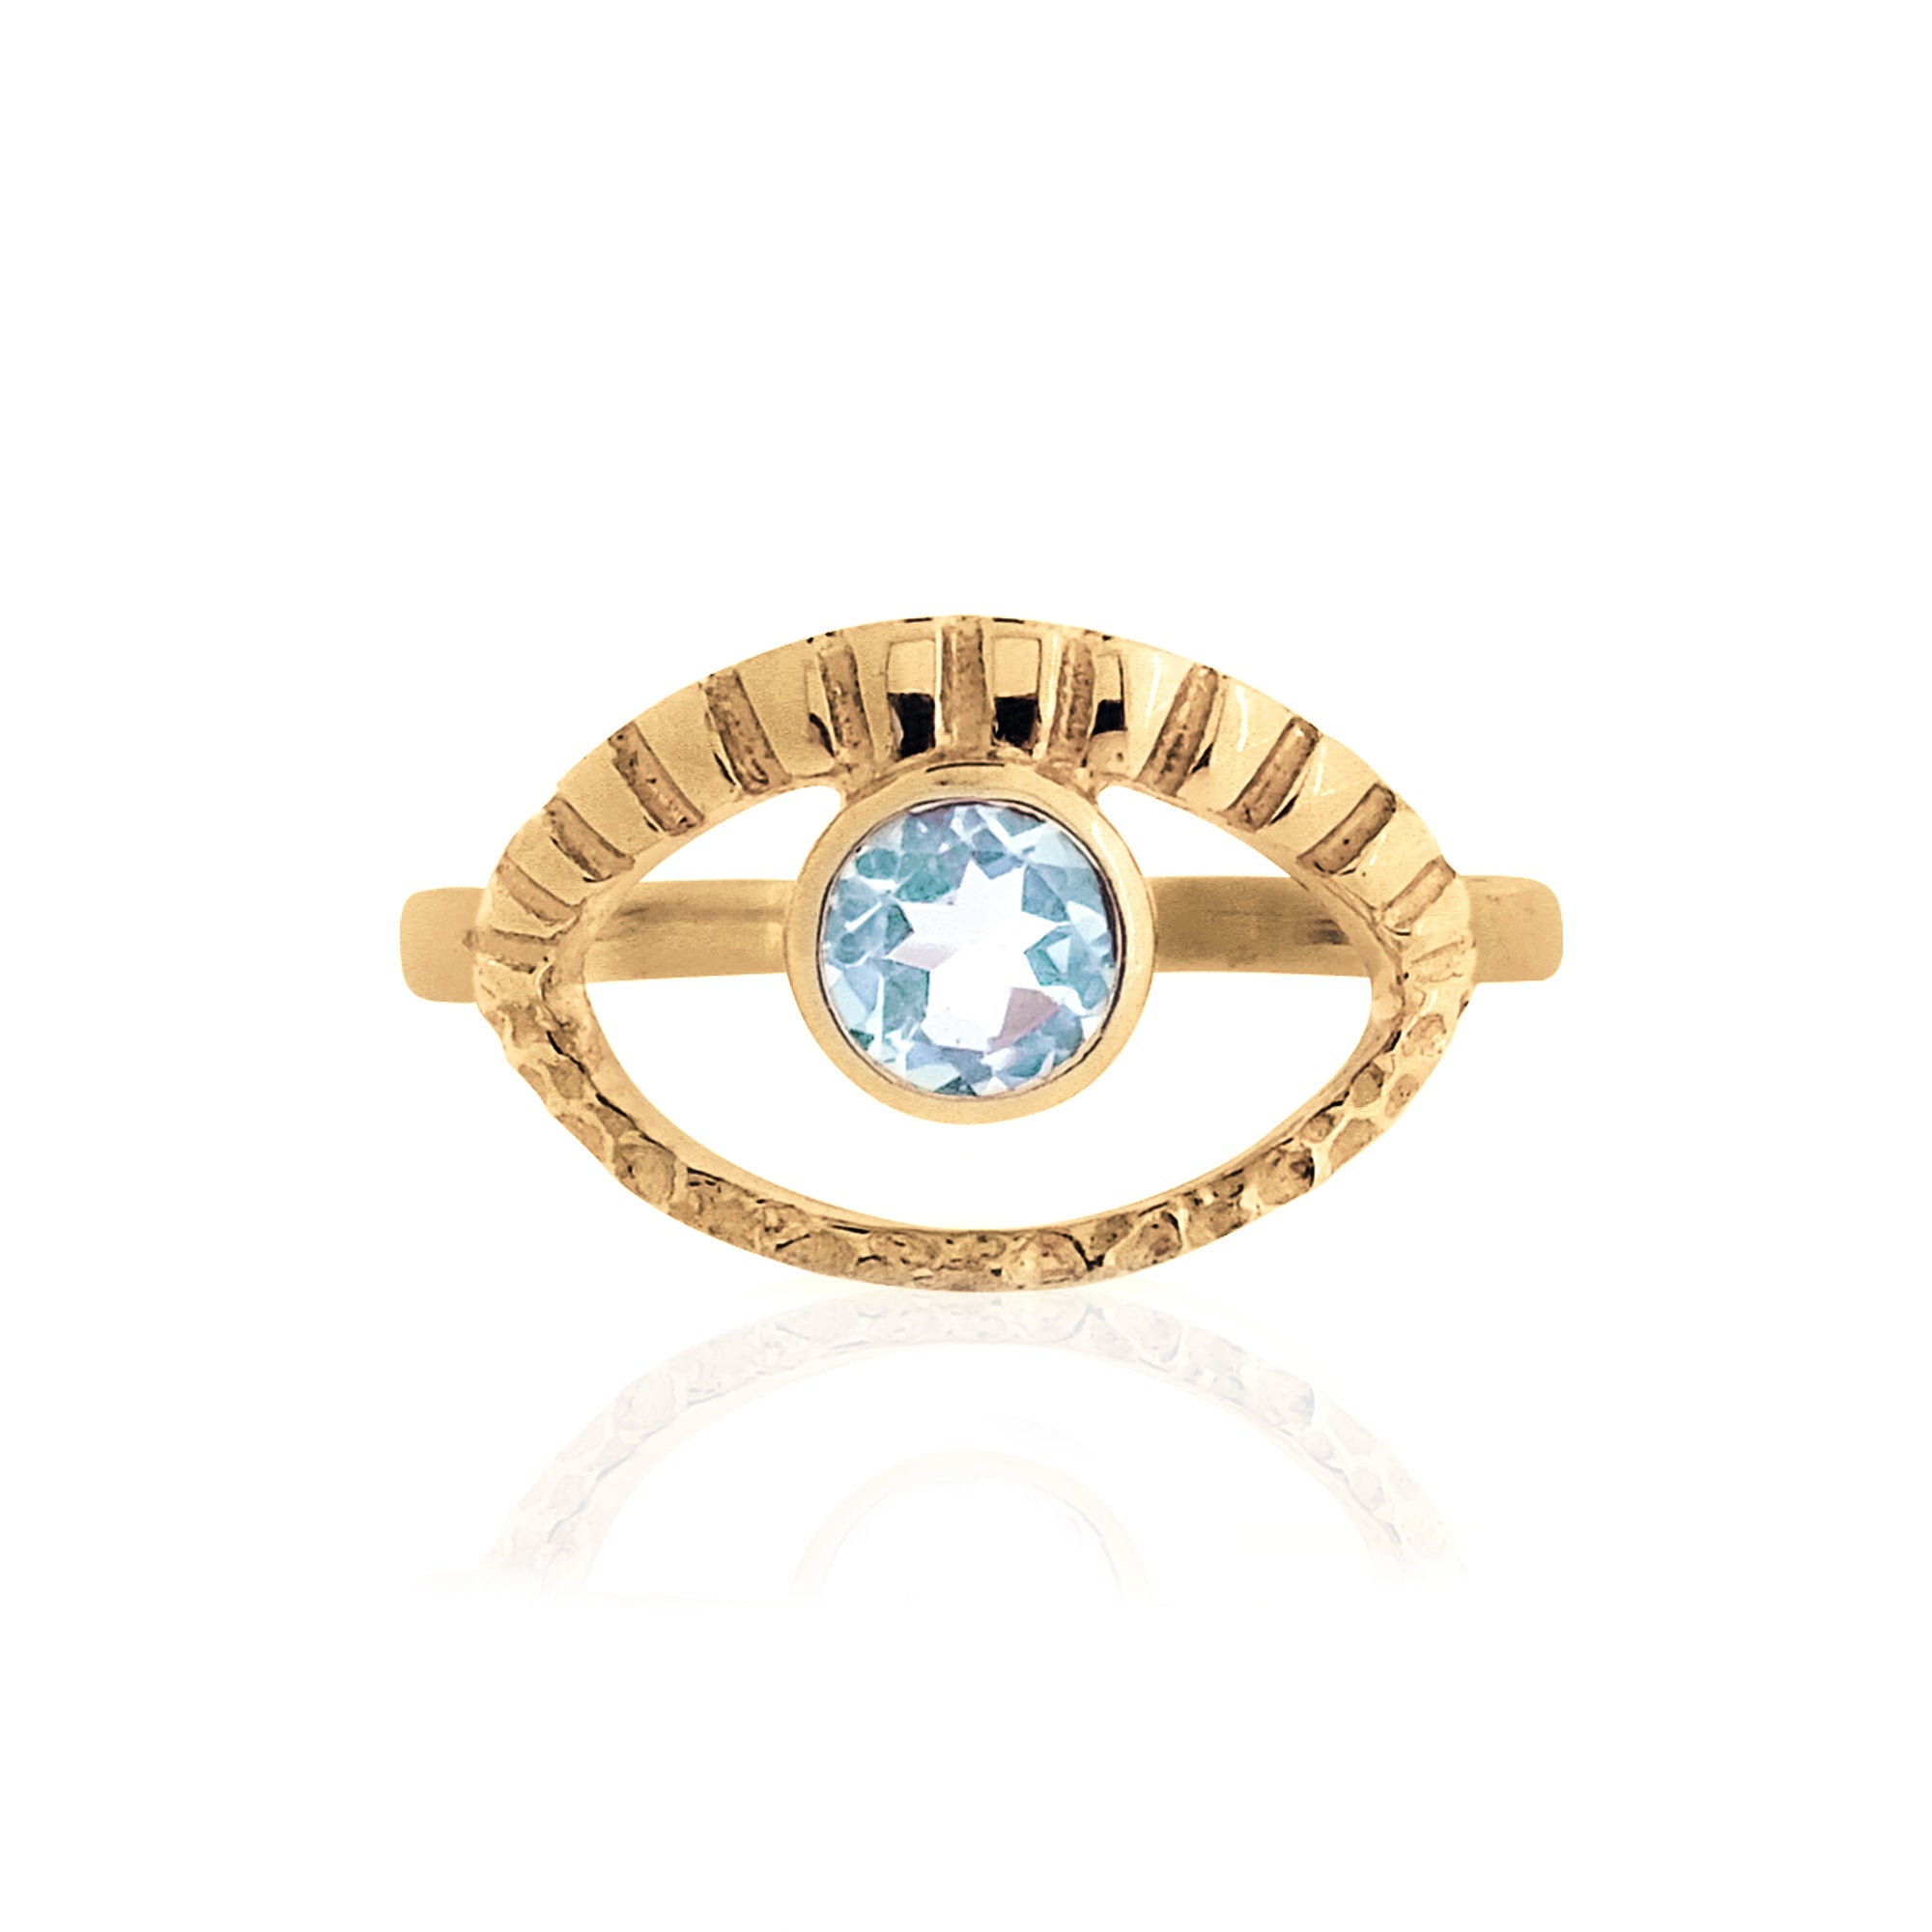 EYE OF INTUITION RING GOLD